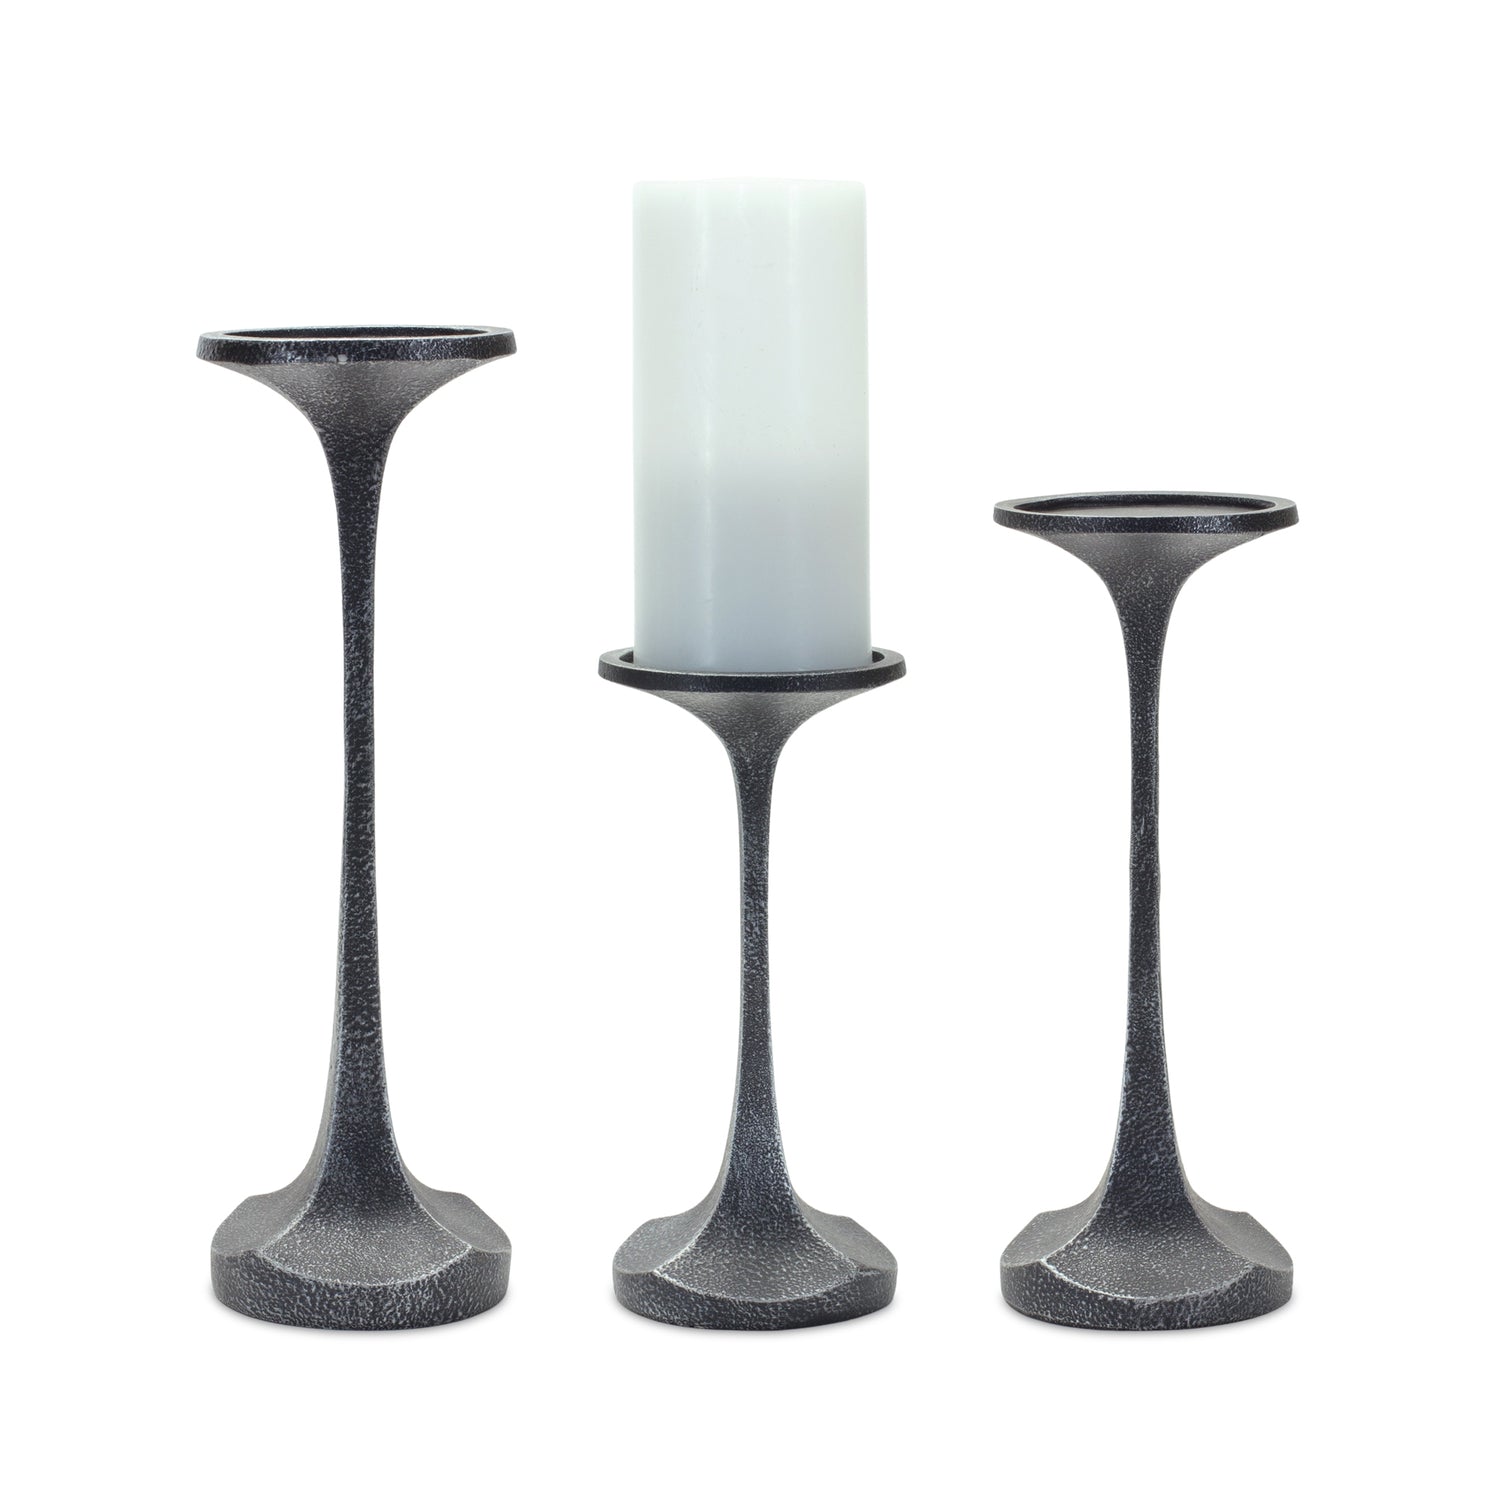 Candle Holder (Set of 3) 8.25"H, 10"H, 12.25"H Resin